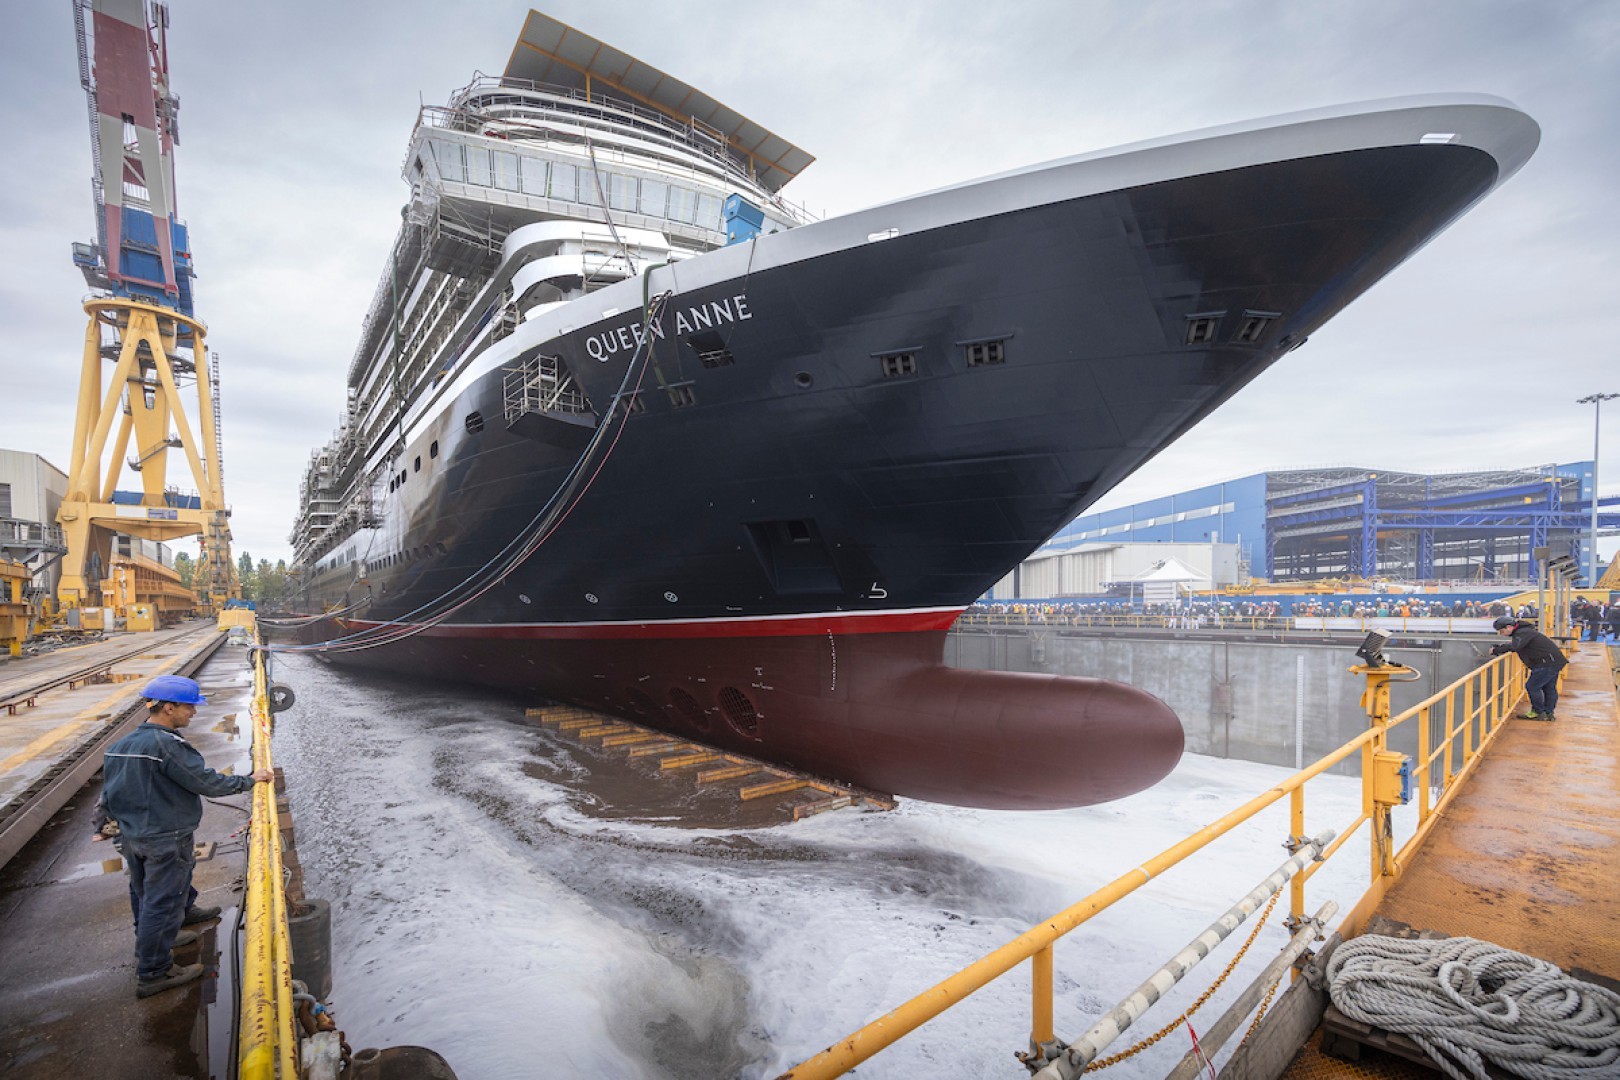 Cunard celebrates the float out of Queen Anne with milestone ceremony in Italy